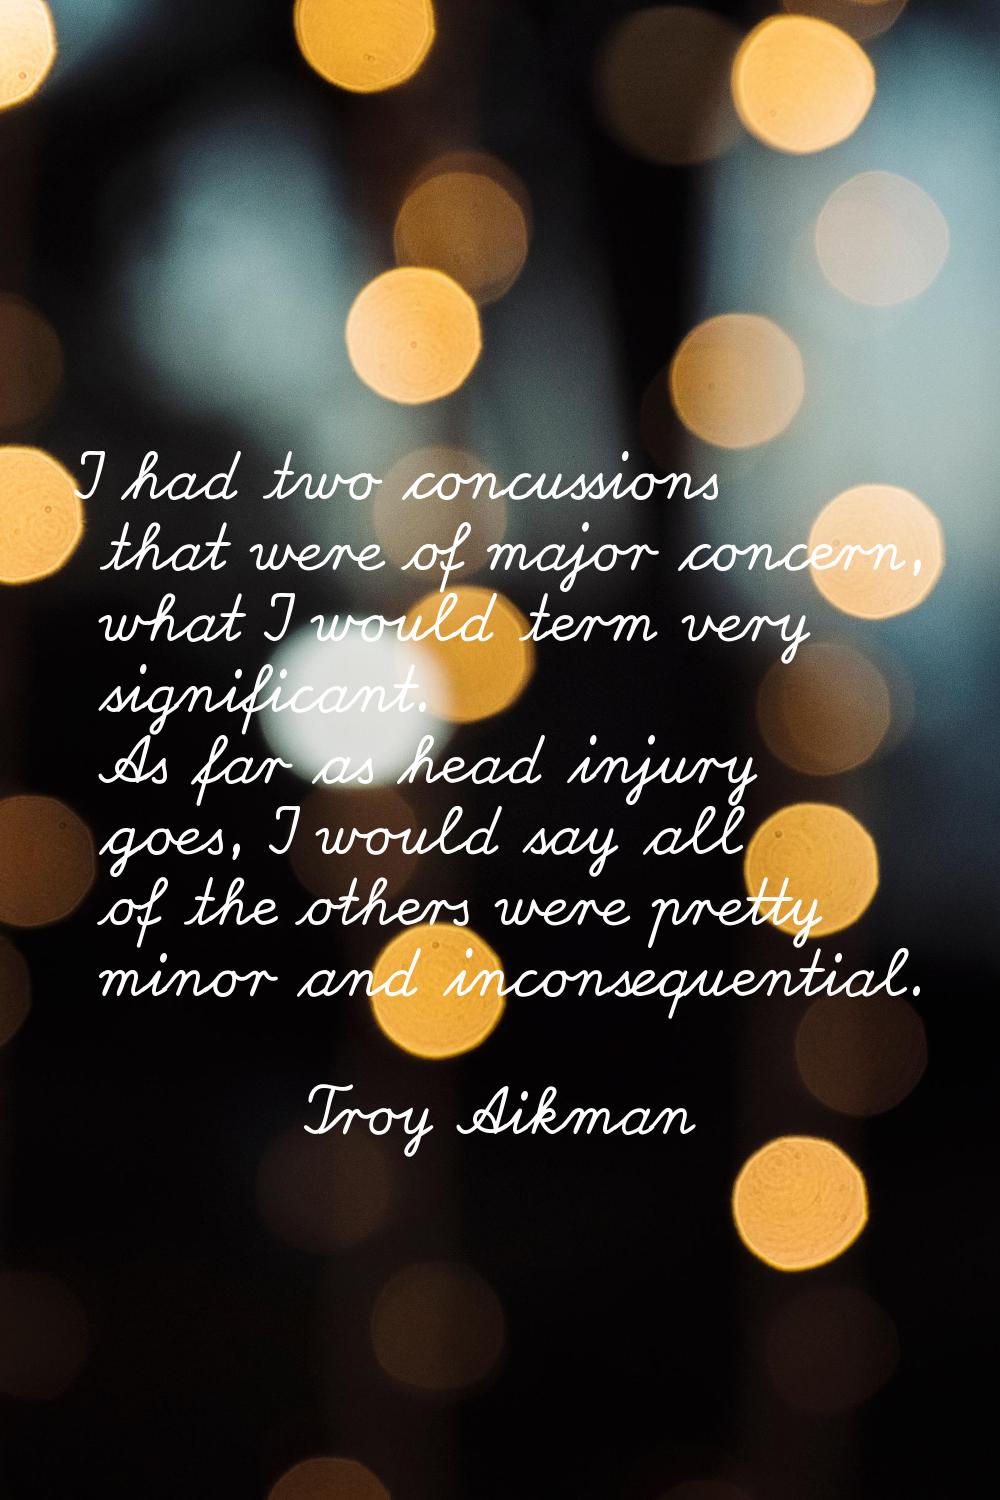 I had two concussions that were of major concern, what I would term very significant. As far as hea